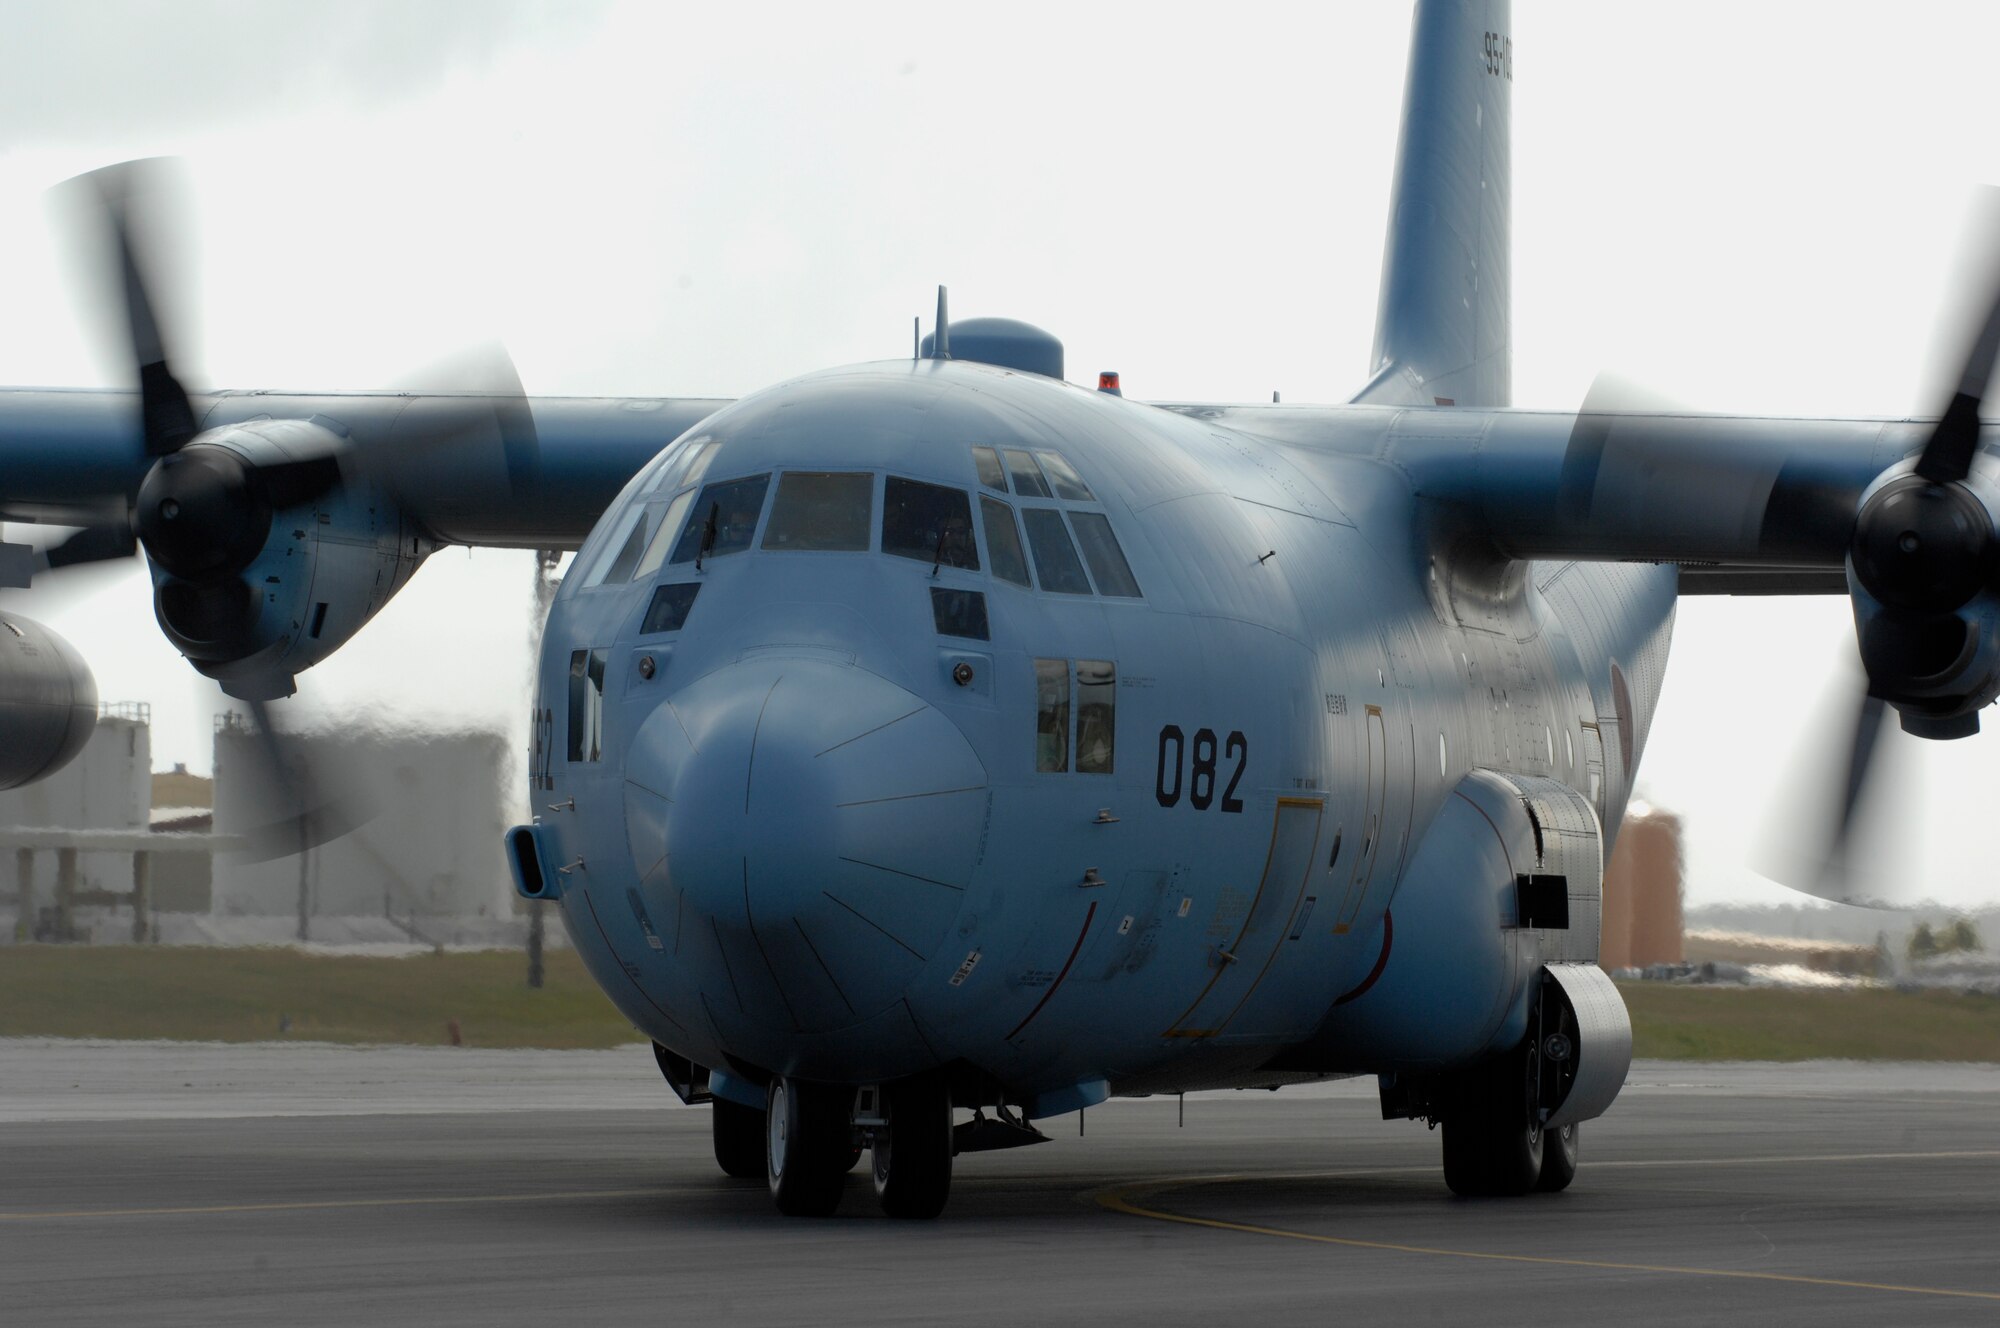 ANDERSEN AIR FORCE BASE, Guam -- A C-130 Hercules from the Japan Air Self Defense Force taxis on Andersen AFB's flightline after landing here for participation in Exercise Cope North 09-1 Jan. 27.  More than 60 JASDF members arrived in three C-130s to participate in Exercise Cope North 09-1, a regularly scheduled exercise scheduled for Feb. 2-13.  Cope North is designed to enhance U.S. and Japanese air operations in defense of Japan.  (U.S. Air Force photo by Master Sgt. Kevin J. Gruenwald) 


